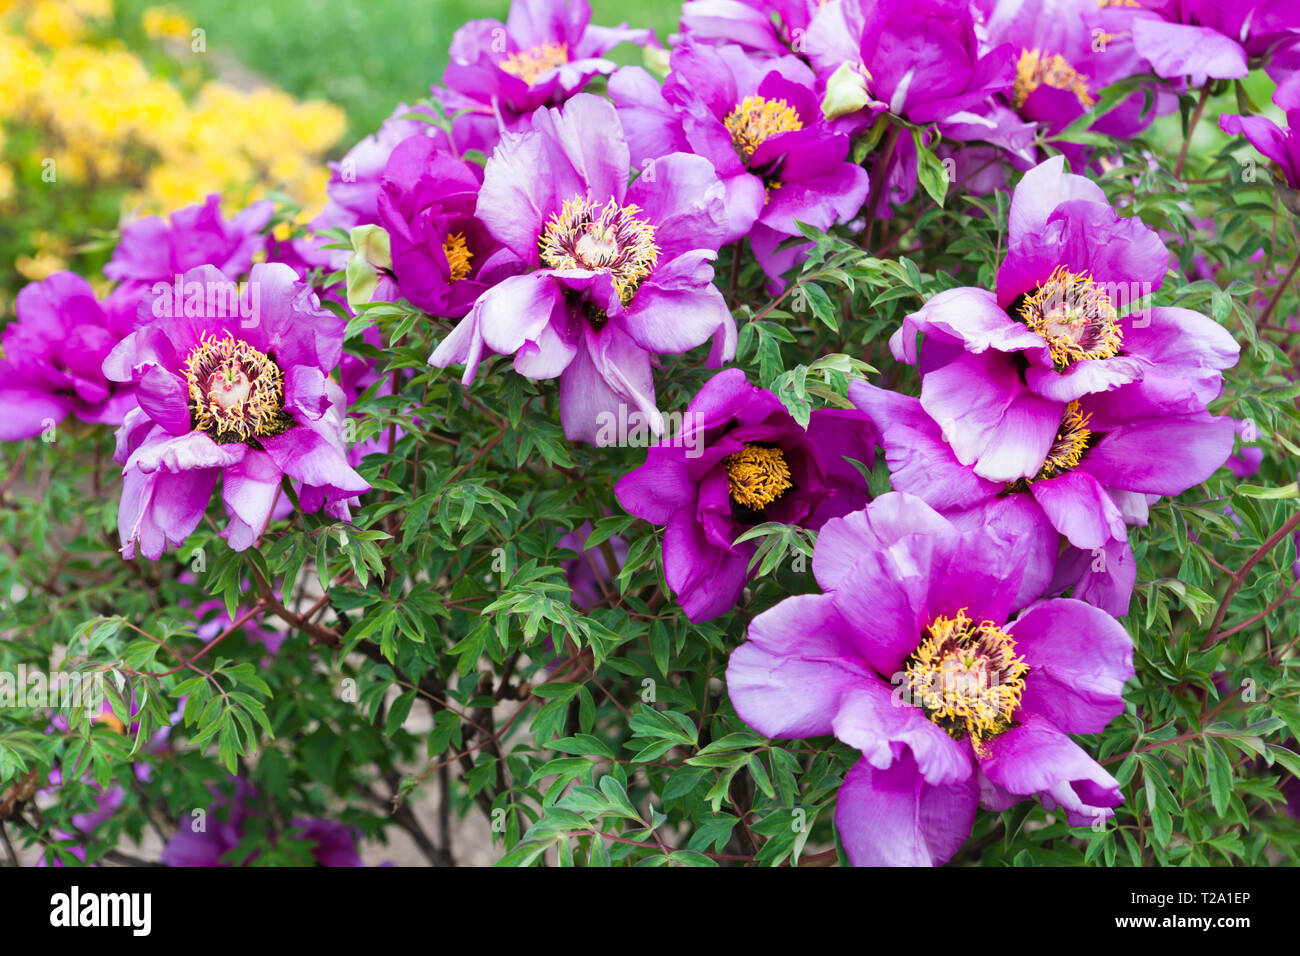 Big lilac anemone flowers in the garden Stock Photo